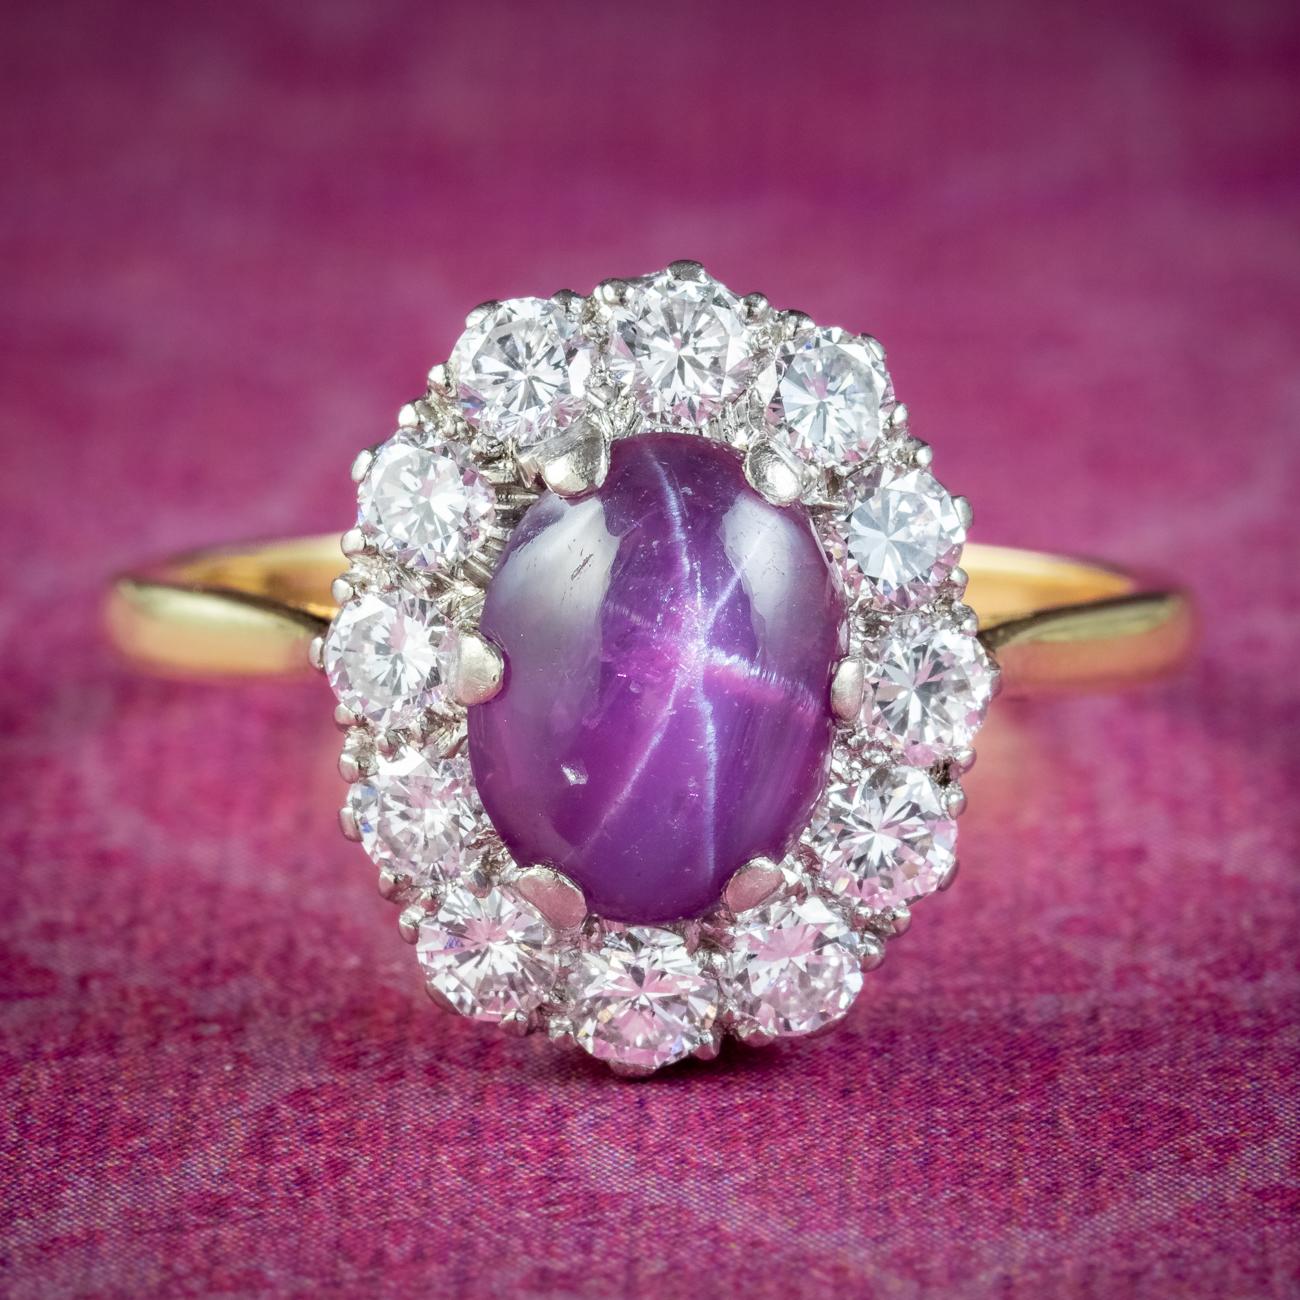  A magnificent antique Edwardian cluster ring crowned with a natural cabochon star ruby weighing approx. 1.8ct, haloed by twelve bright brilliant cut diamonds totalling approx. 1.2ct. 

The ruby has a desirable cherry-pink hue with a ghostly inner